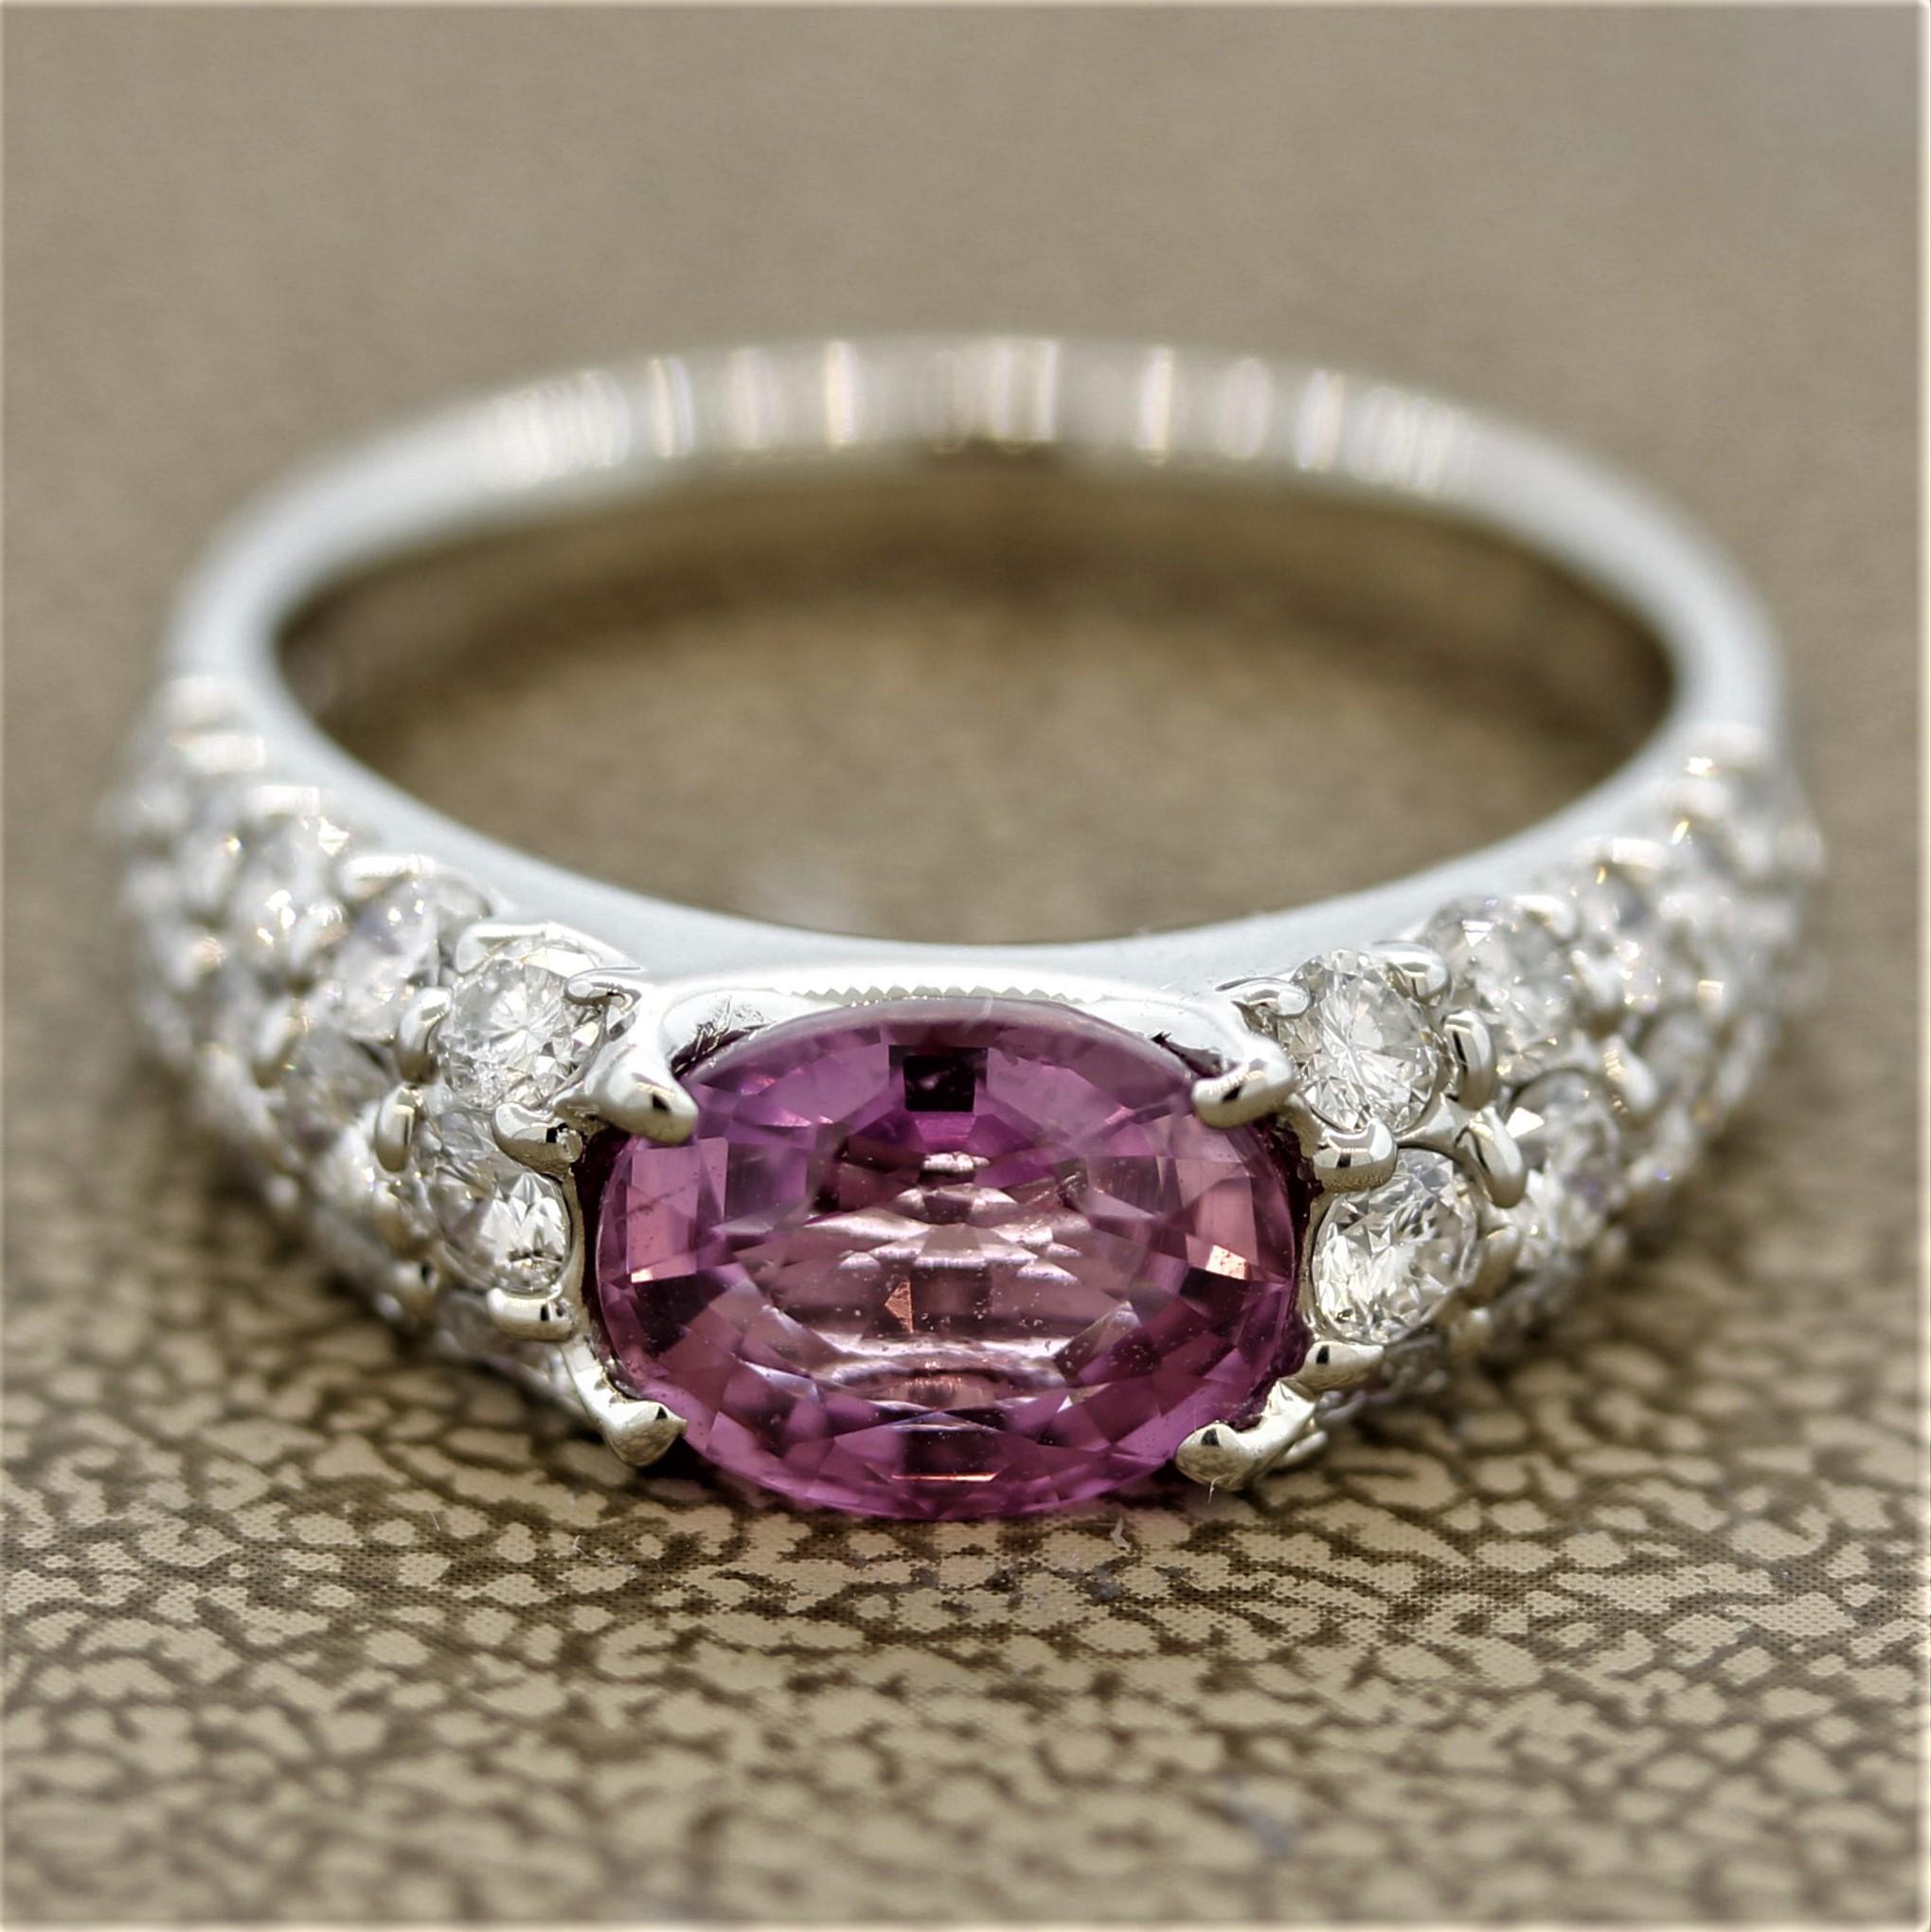 A superb pink sapphire ring! The sapphire is cut as an oval shape weighing 2.37 carats and has a pure bright pink color. It is accented by 1.15 carats of round brilliant cut diamonds set on the sides of the ring. Hand-fabricated in platinum.

Ring